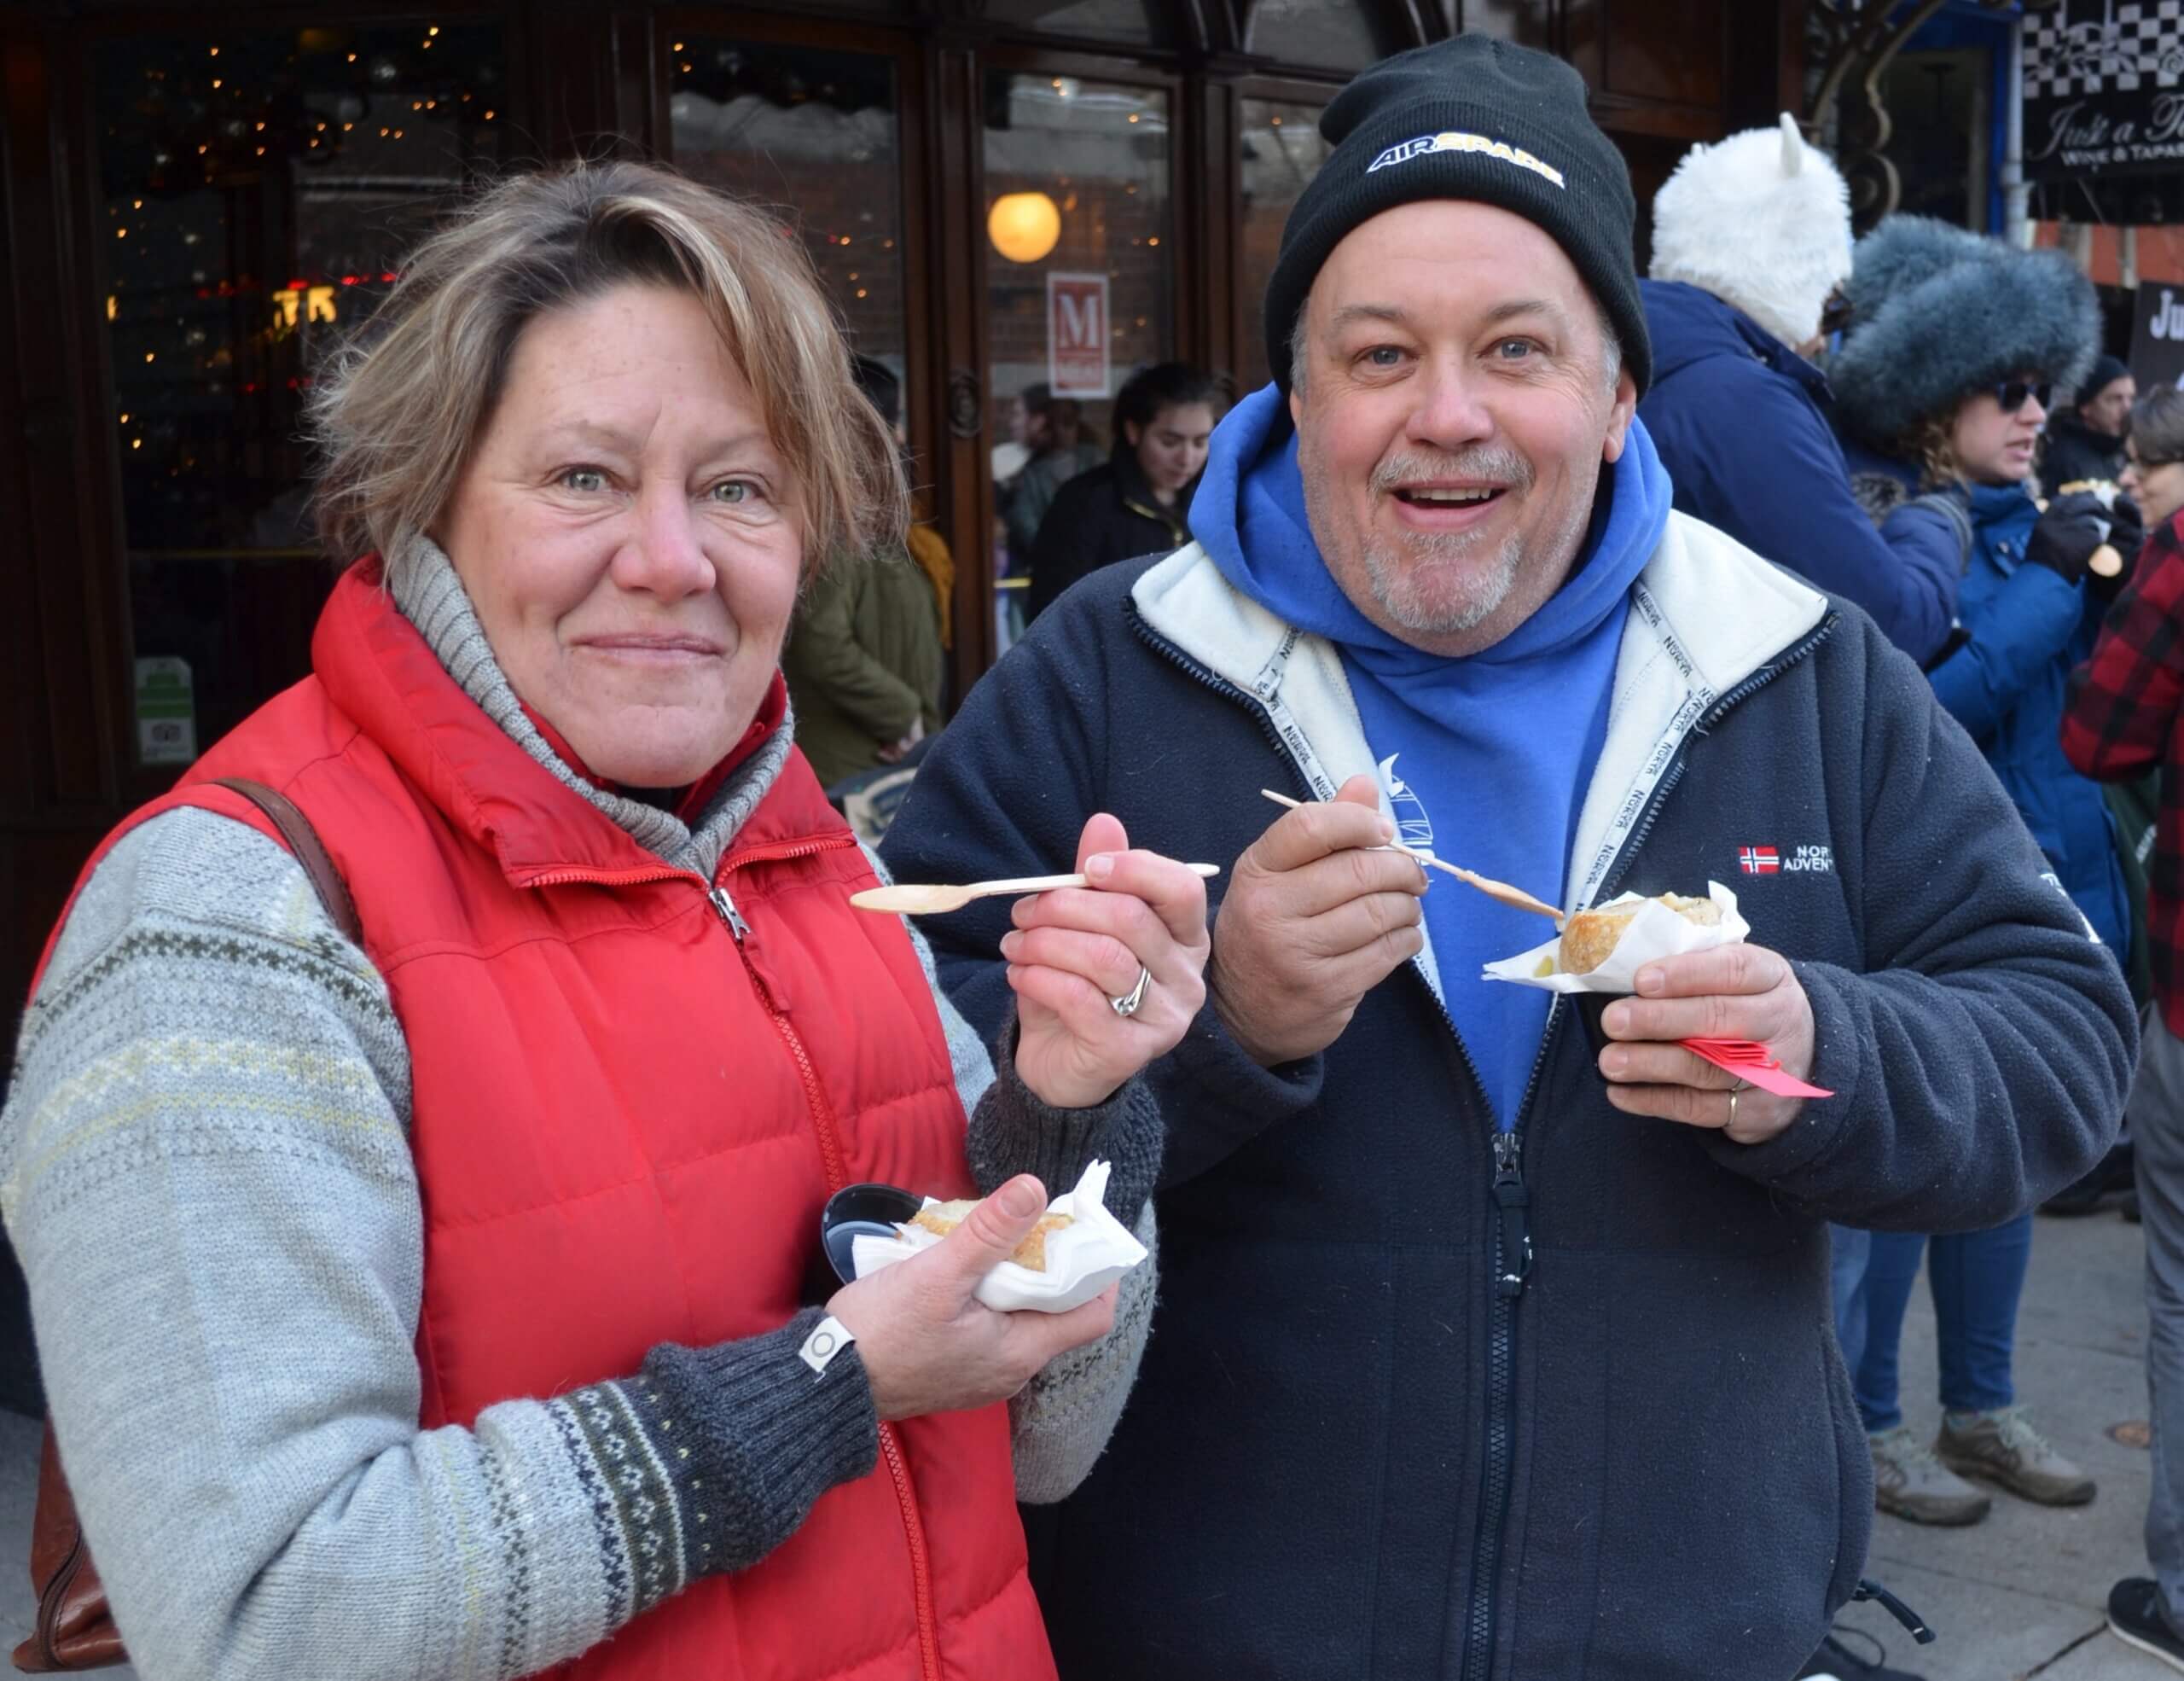 Participants in a past Chowder Cook-Off- man and woman eating chowder and smiling into camera